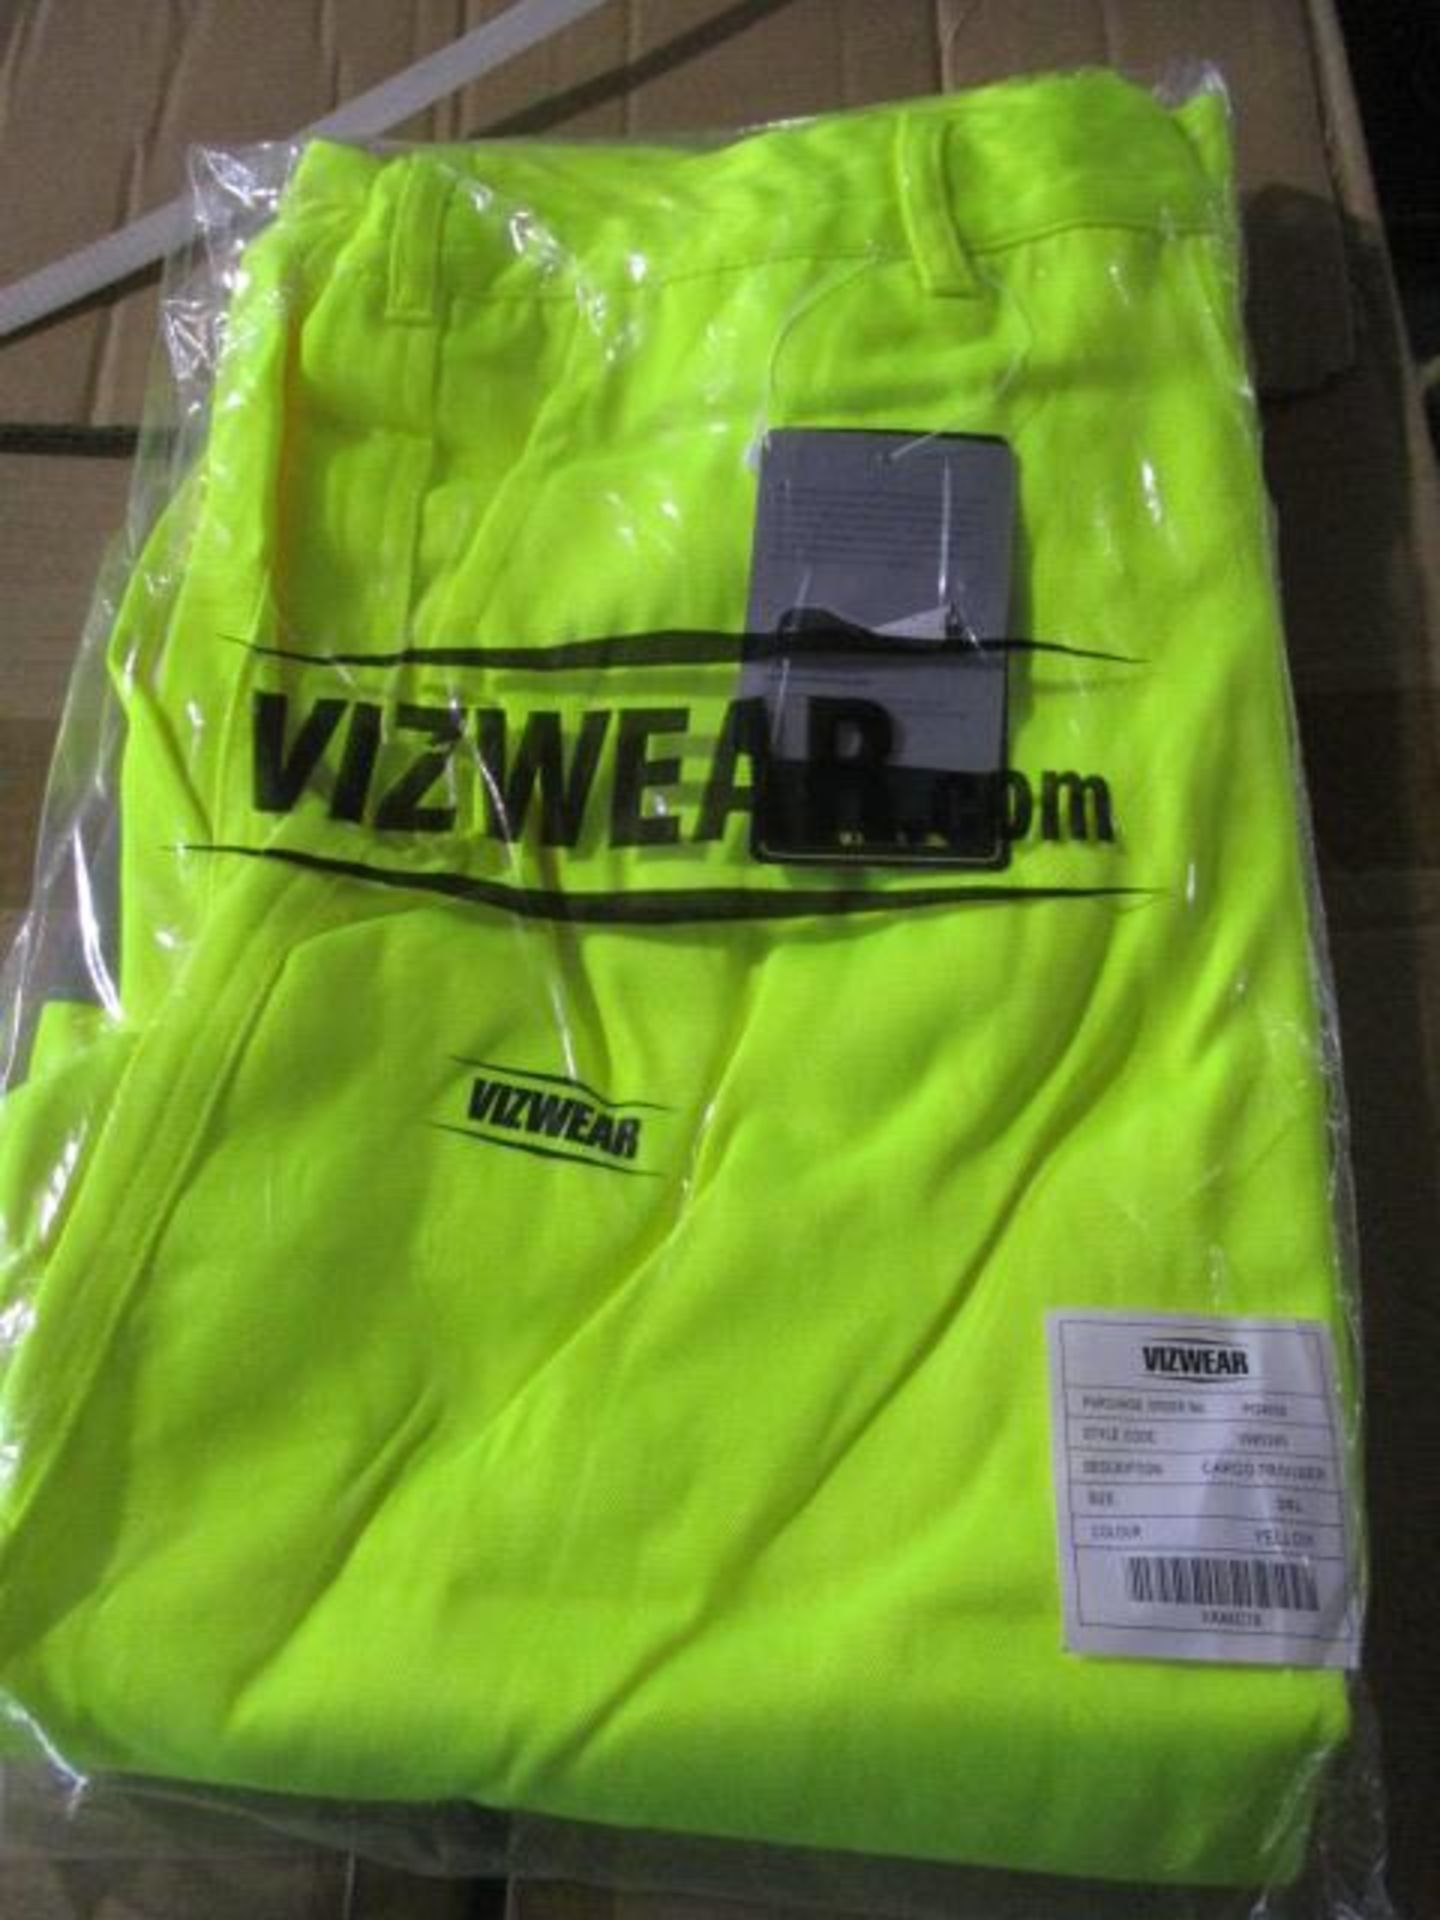 100pcs Brand New Vizwear High Viz Safety Trousers - Mix Of Assorted Sizes